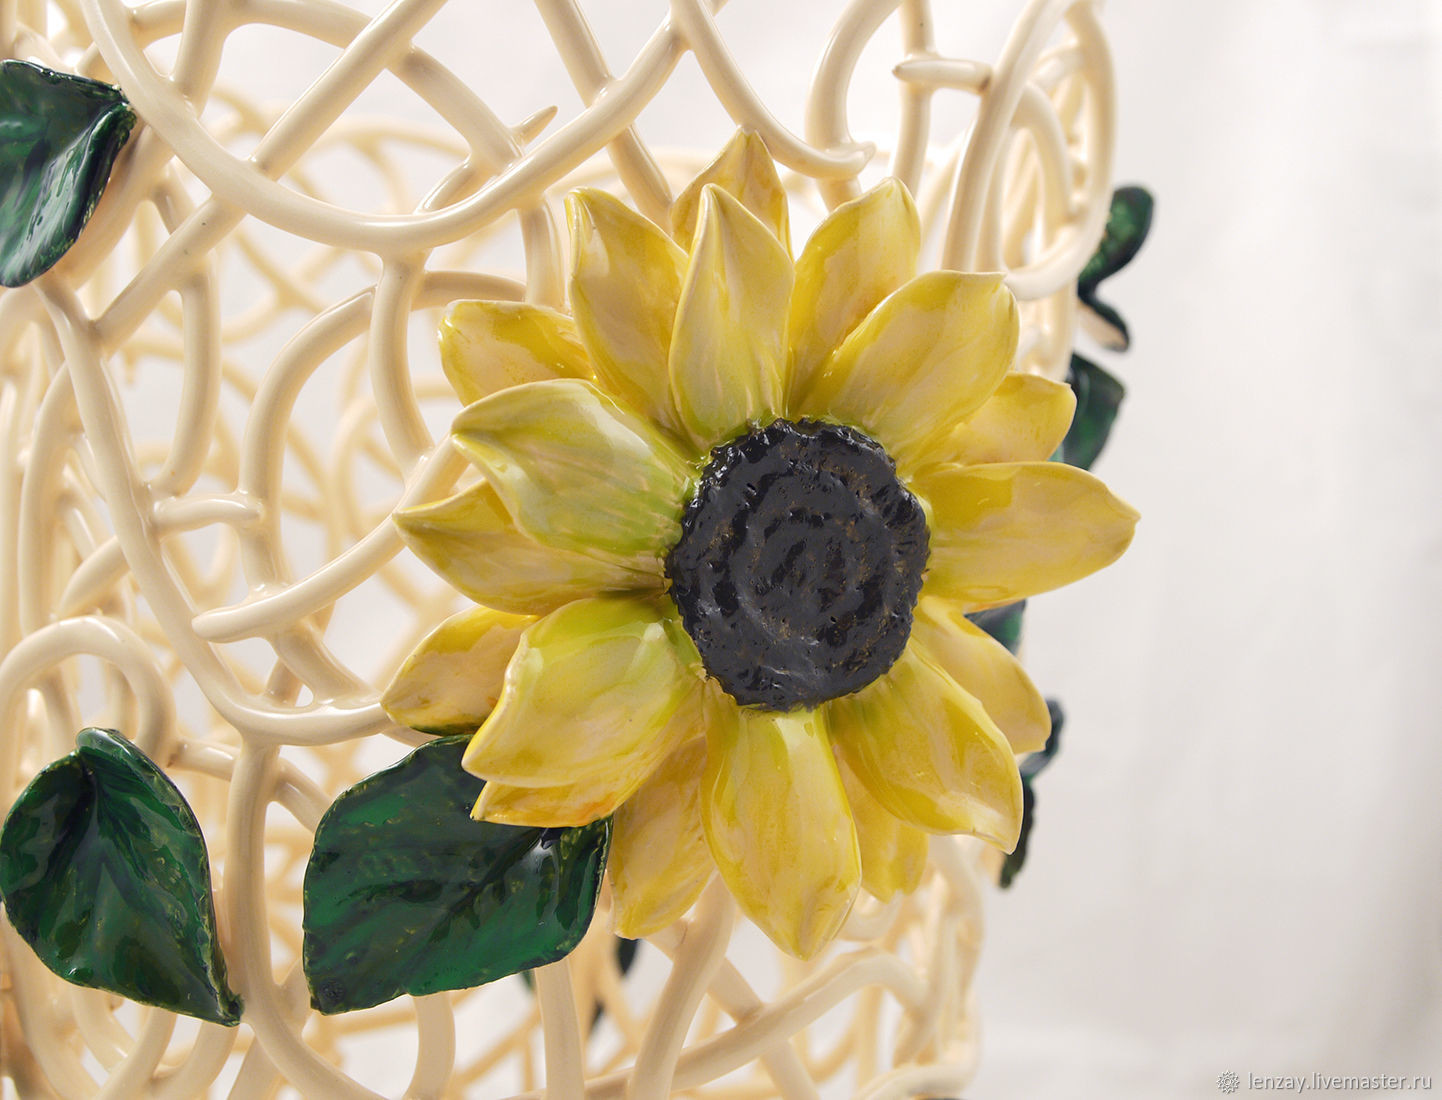 28 Great Cone Shaped Vase 2024 free download cone shaped vase of wicker vase sunflower cone height 25 cm shop online on inside height 25 cm ceramic vase from the collection of sunflowers truncated cone height 25 cm